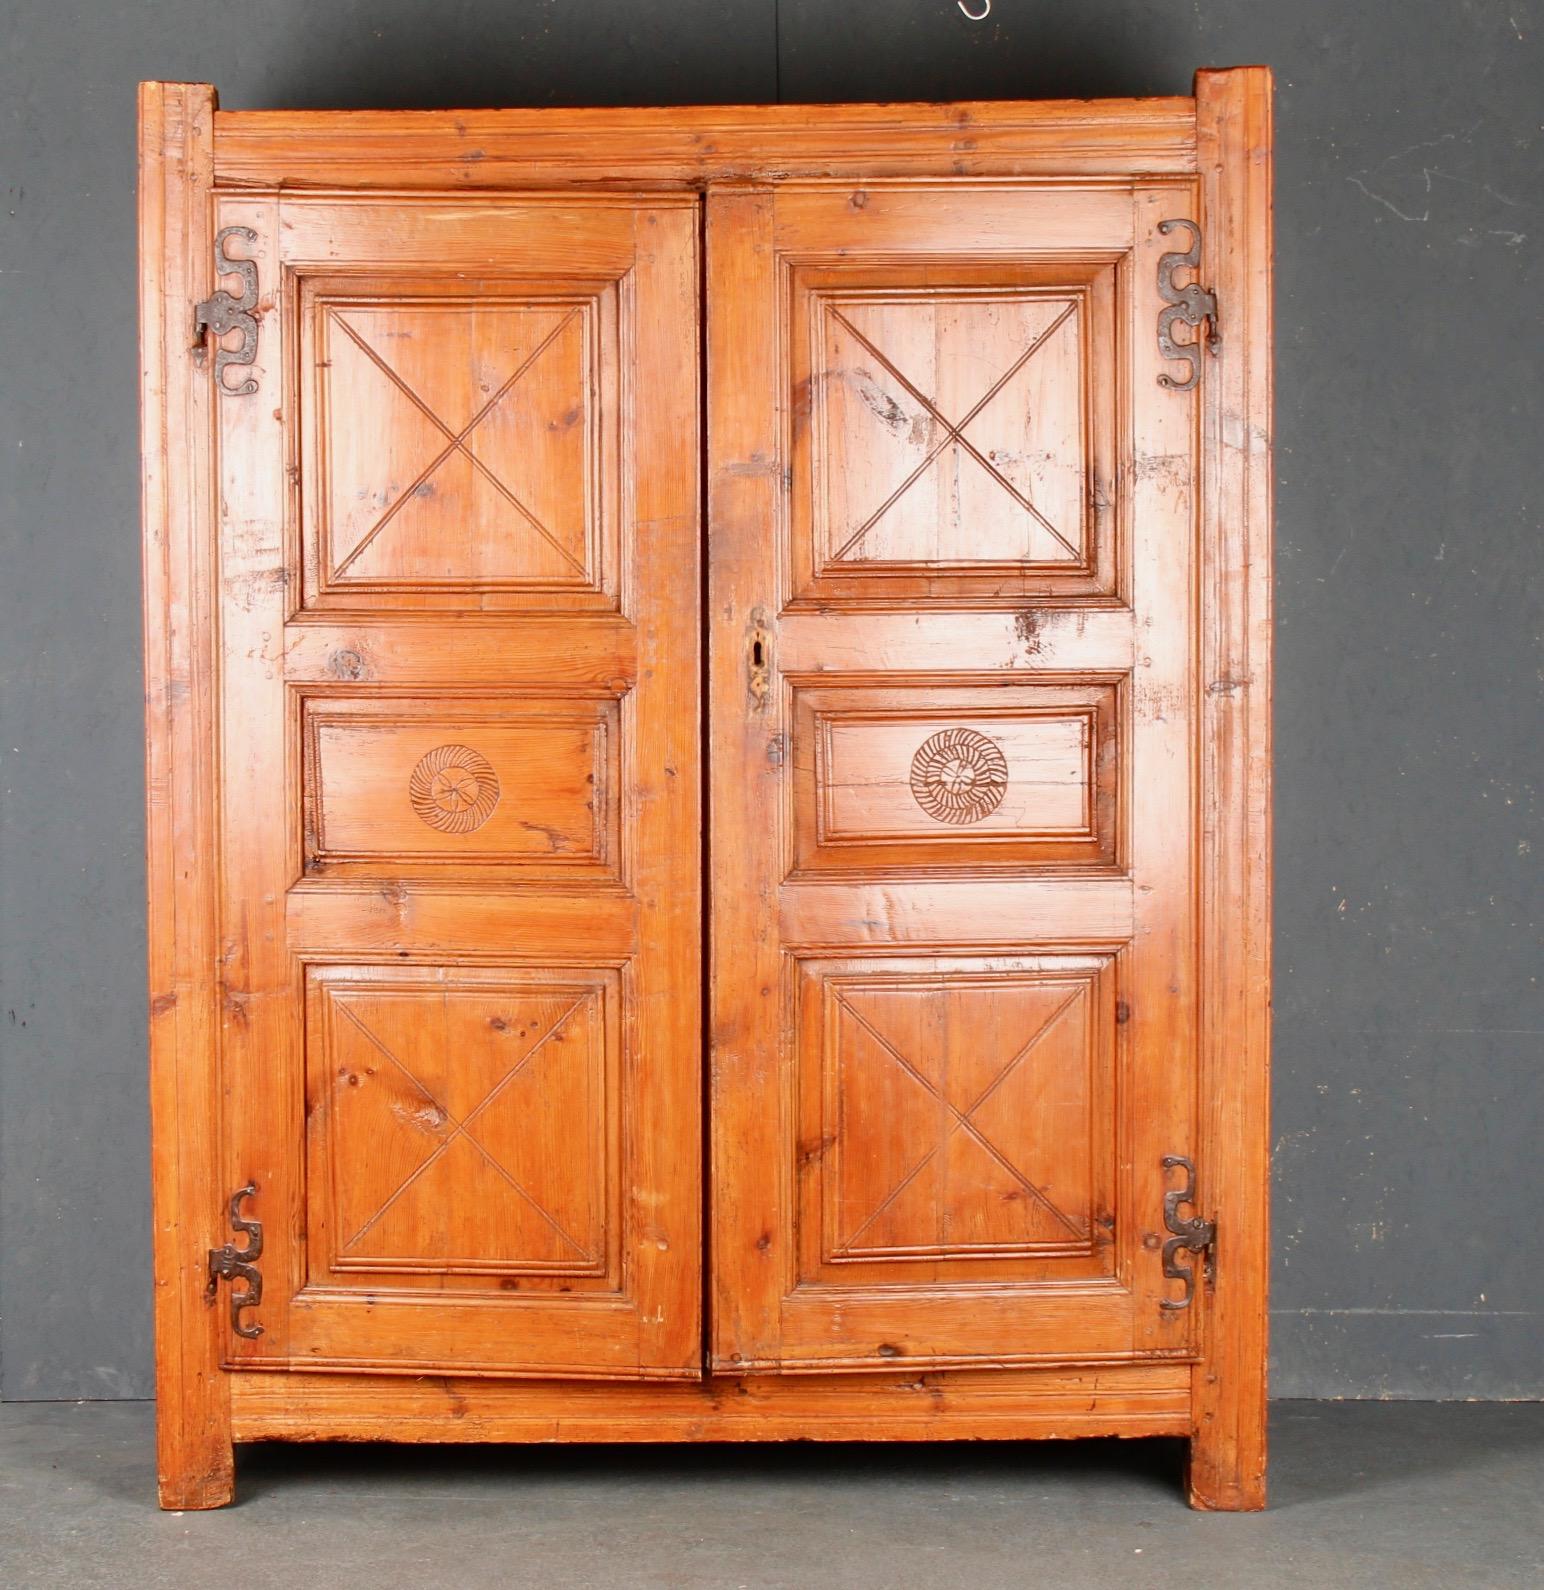 French alp cupboard from Queyras region , the shelves inside are recent